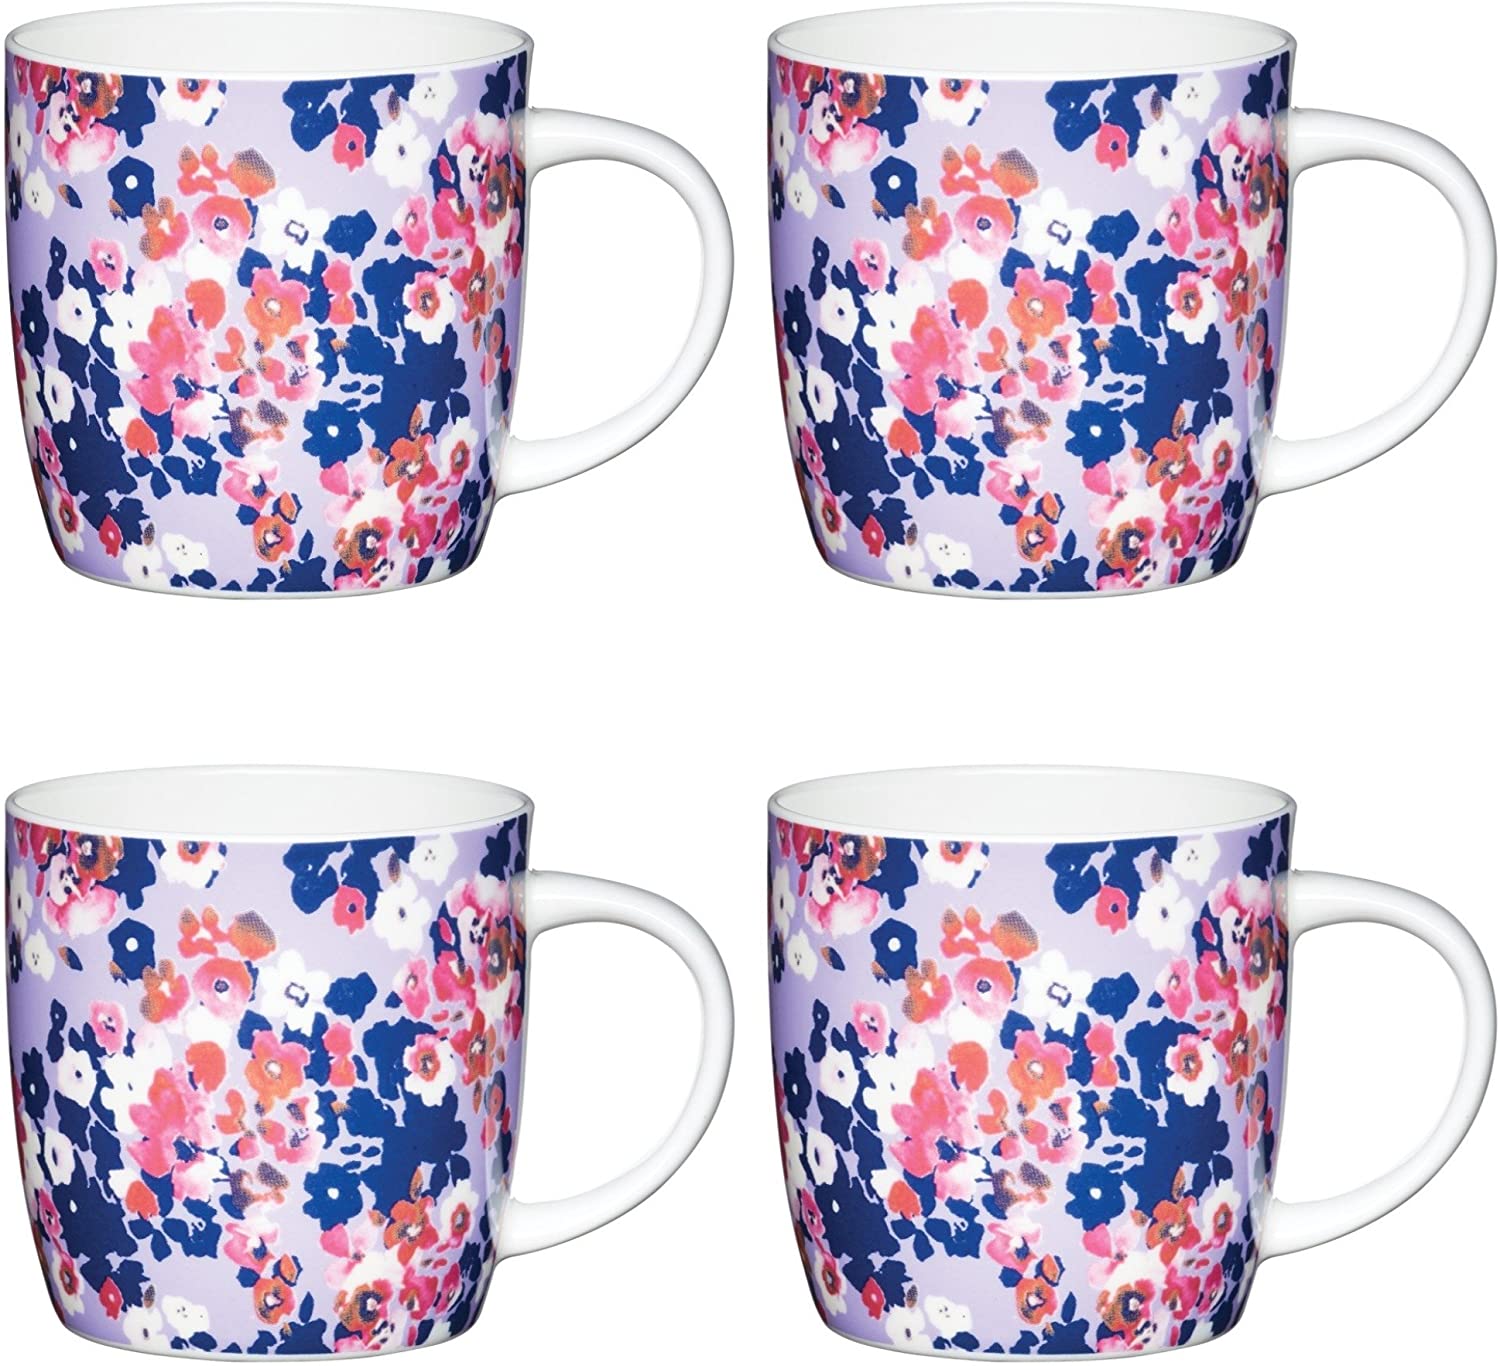 Kitchen Craft 425 ml Fine Painted Ditsy Floral Patterned Barrel Mugs, Set of 4, Bone China, Multi/Color, 8.9 x 12.4 x 9 cm